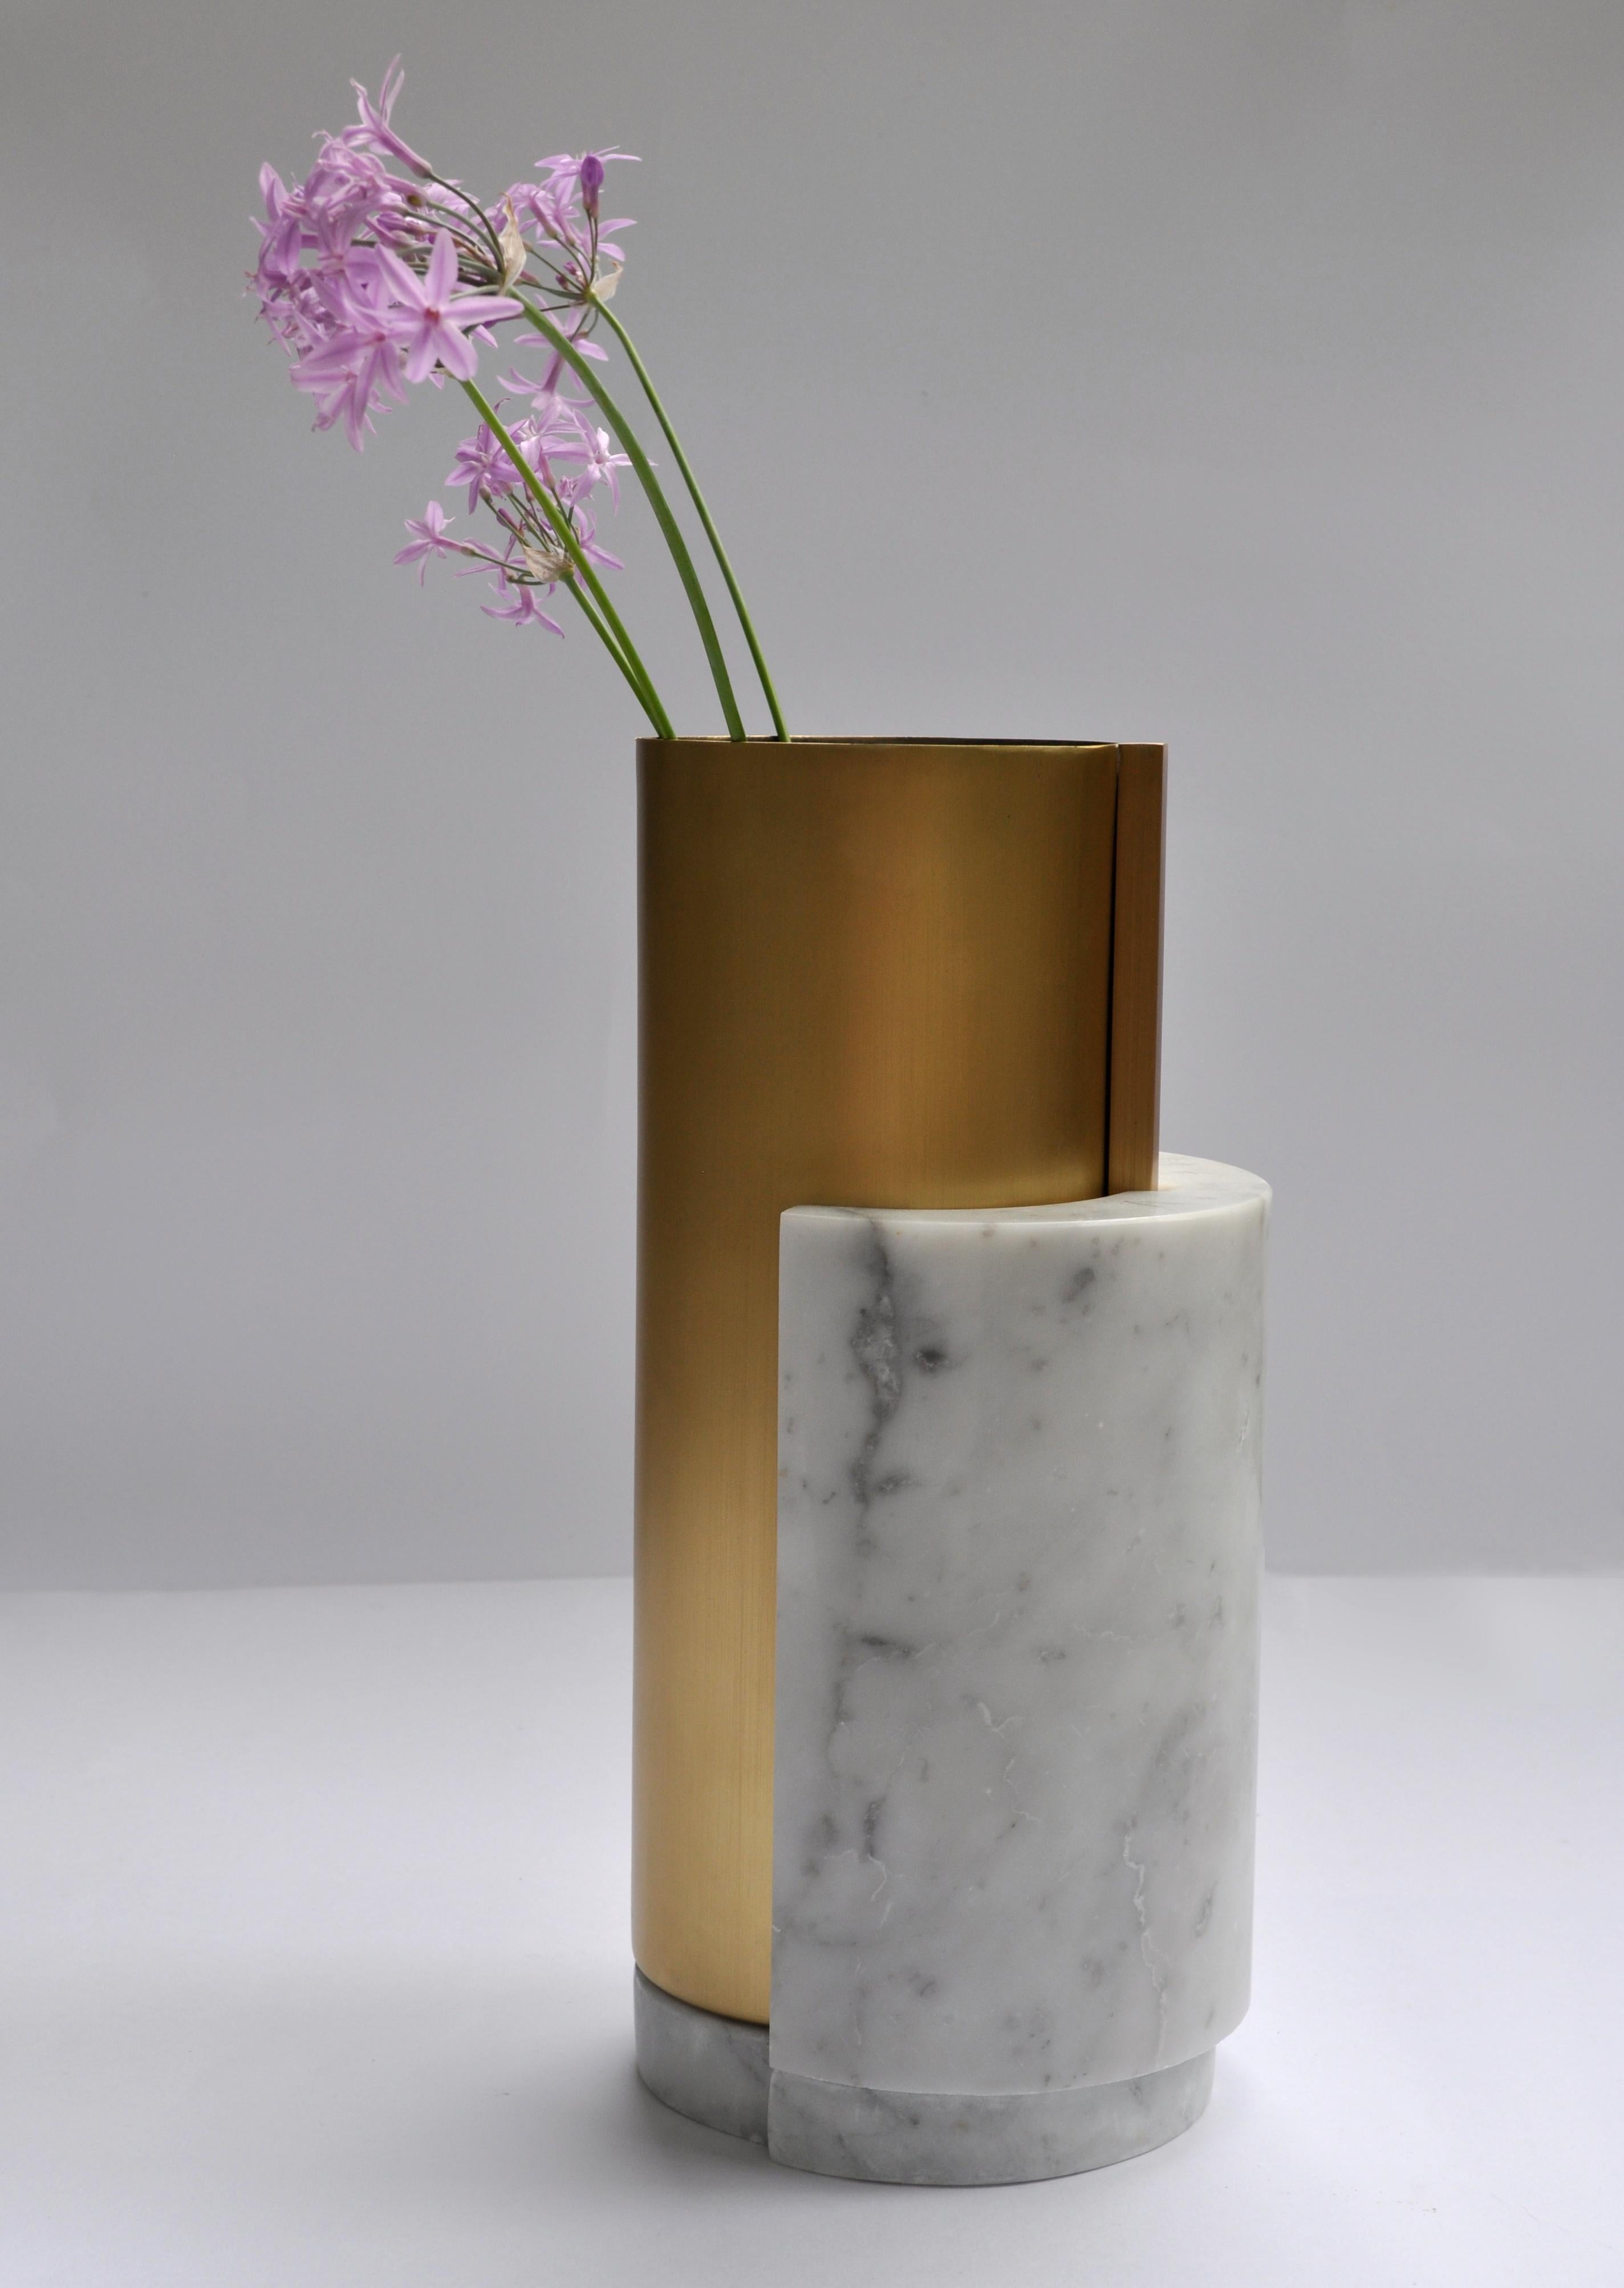 Still Life vase by Saccal Design House
Dimensions: Ø 12 x H 22 cm
Materials: Carrara and Brass

Saccal Design House, located in Beirut Lebanon, was founded in 2014 by two sisters Nour and Maysa Saccal.
The company provides interior design and